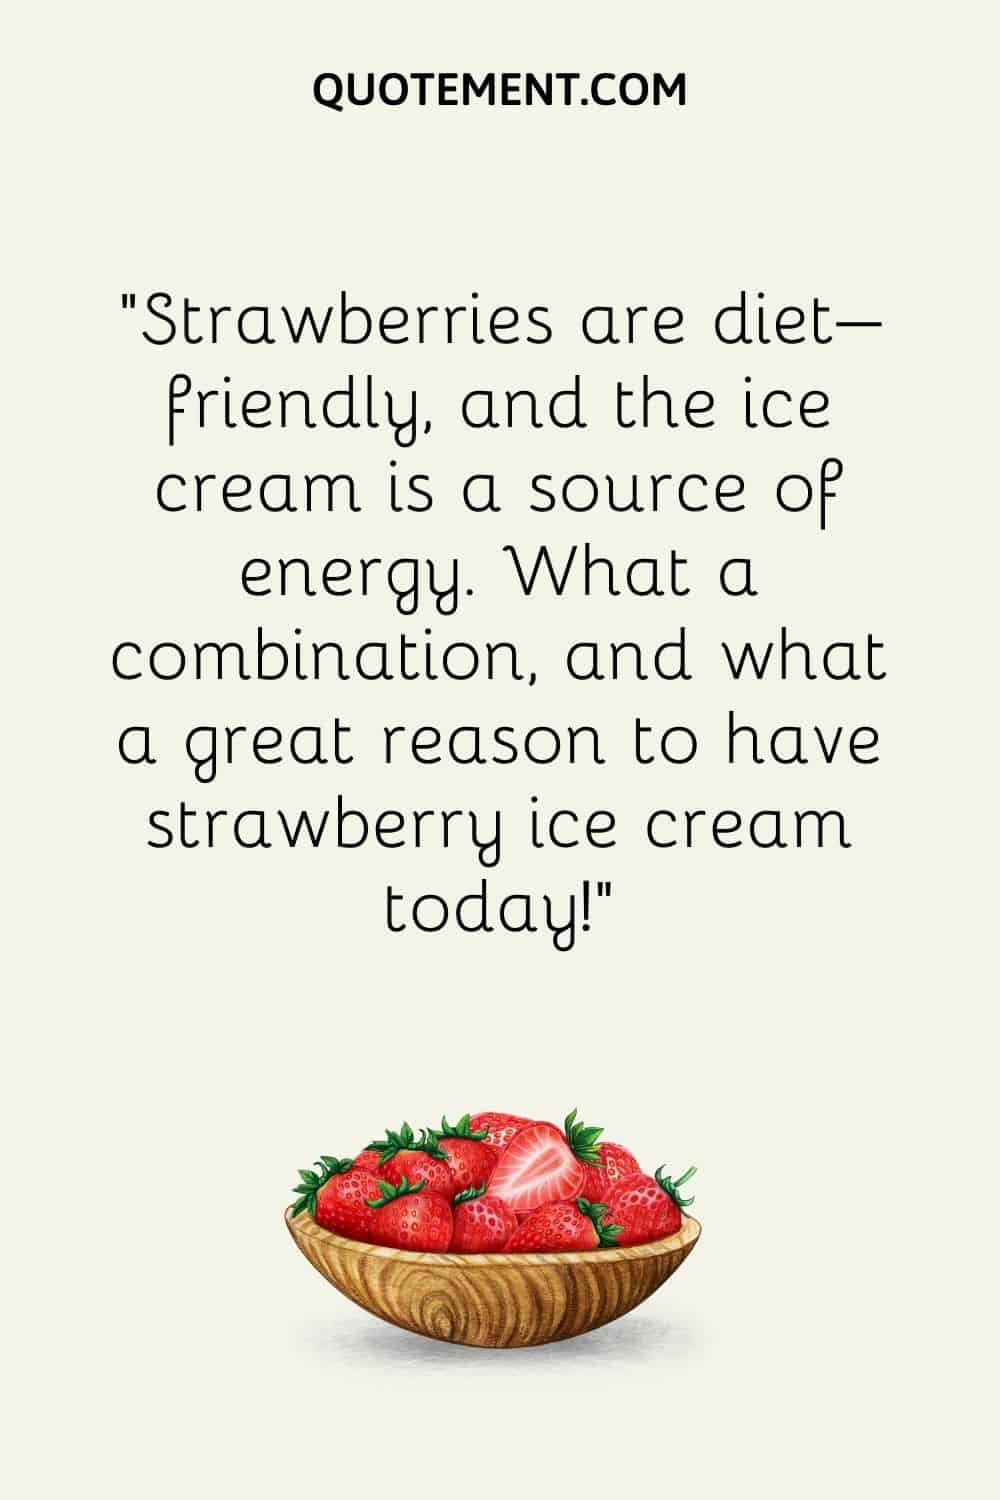 Strawberries are diet–friendly, and the ice cream is a source of energy